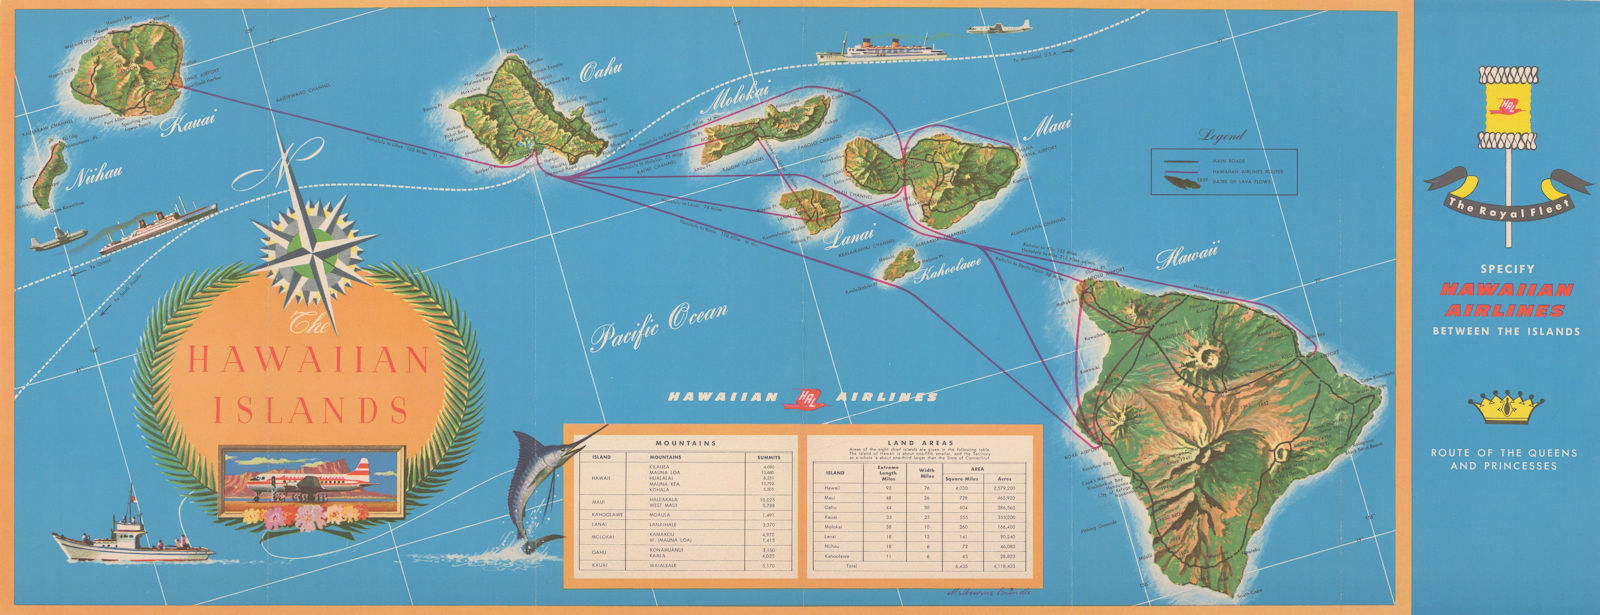 Hawaiian Airlines between the islands. Pictorial network route map. 9"x24" 1954